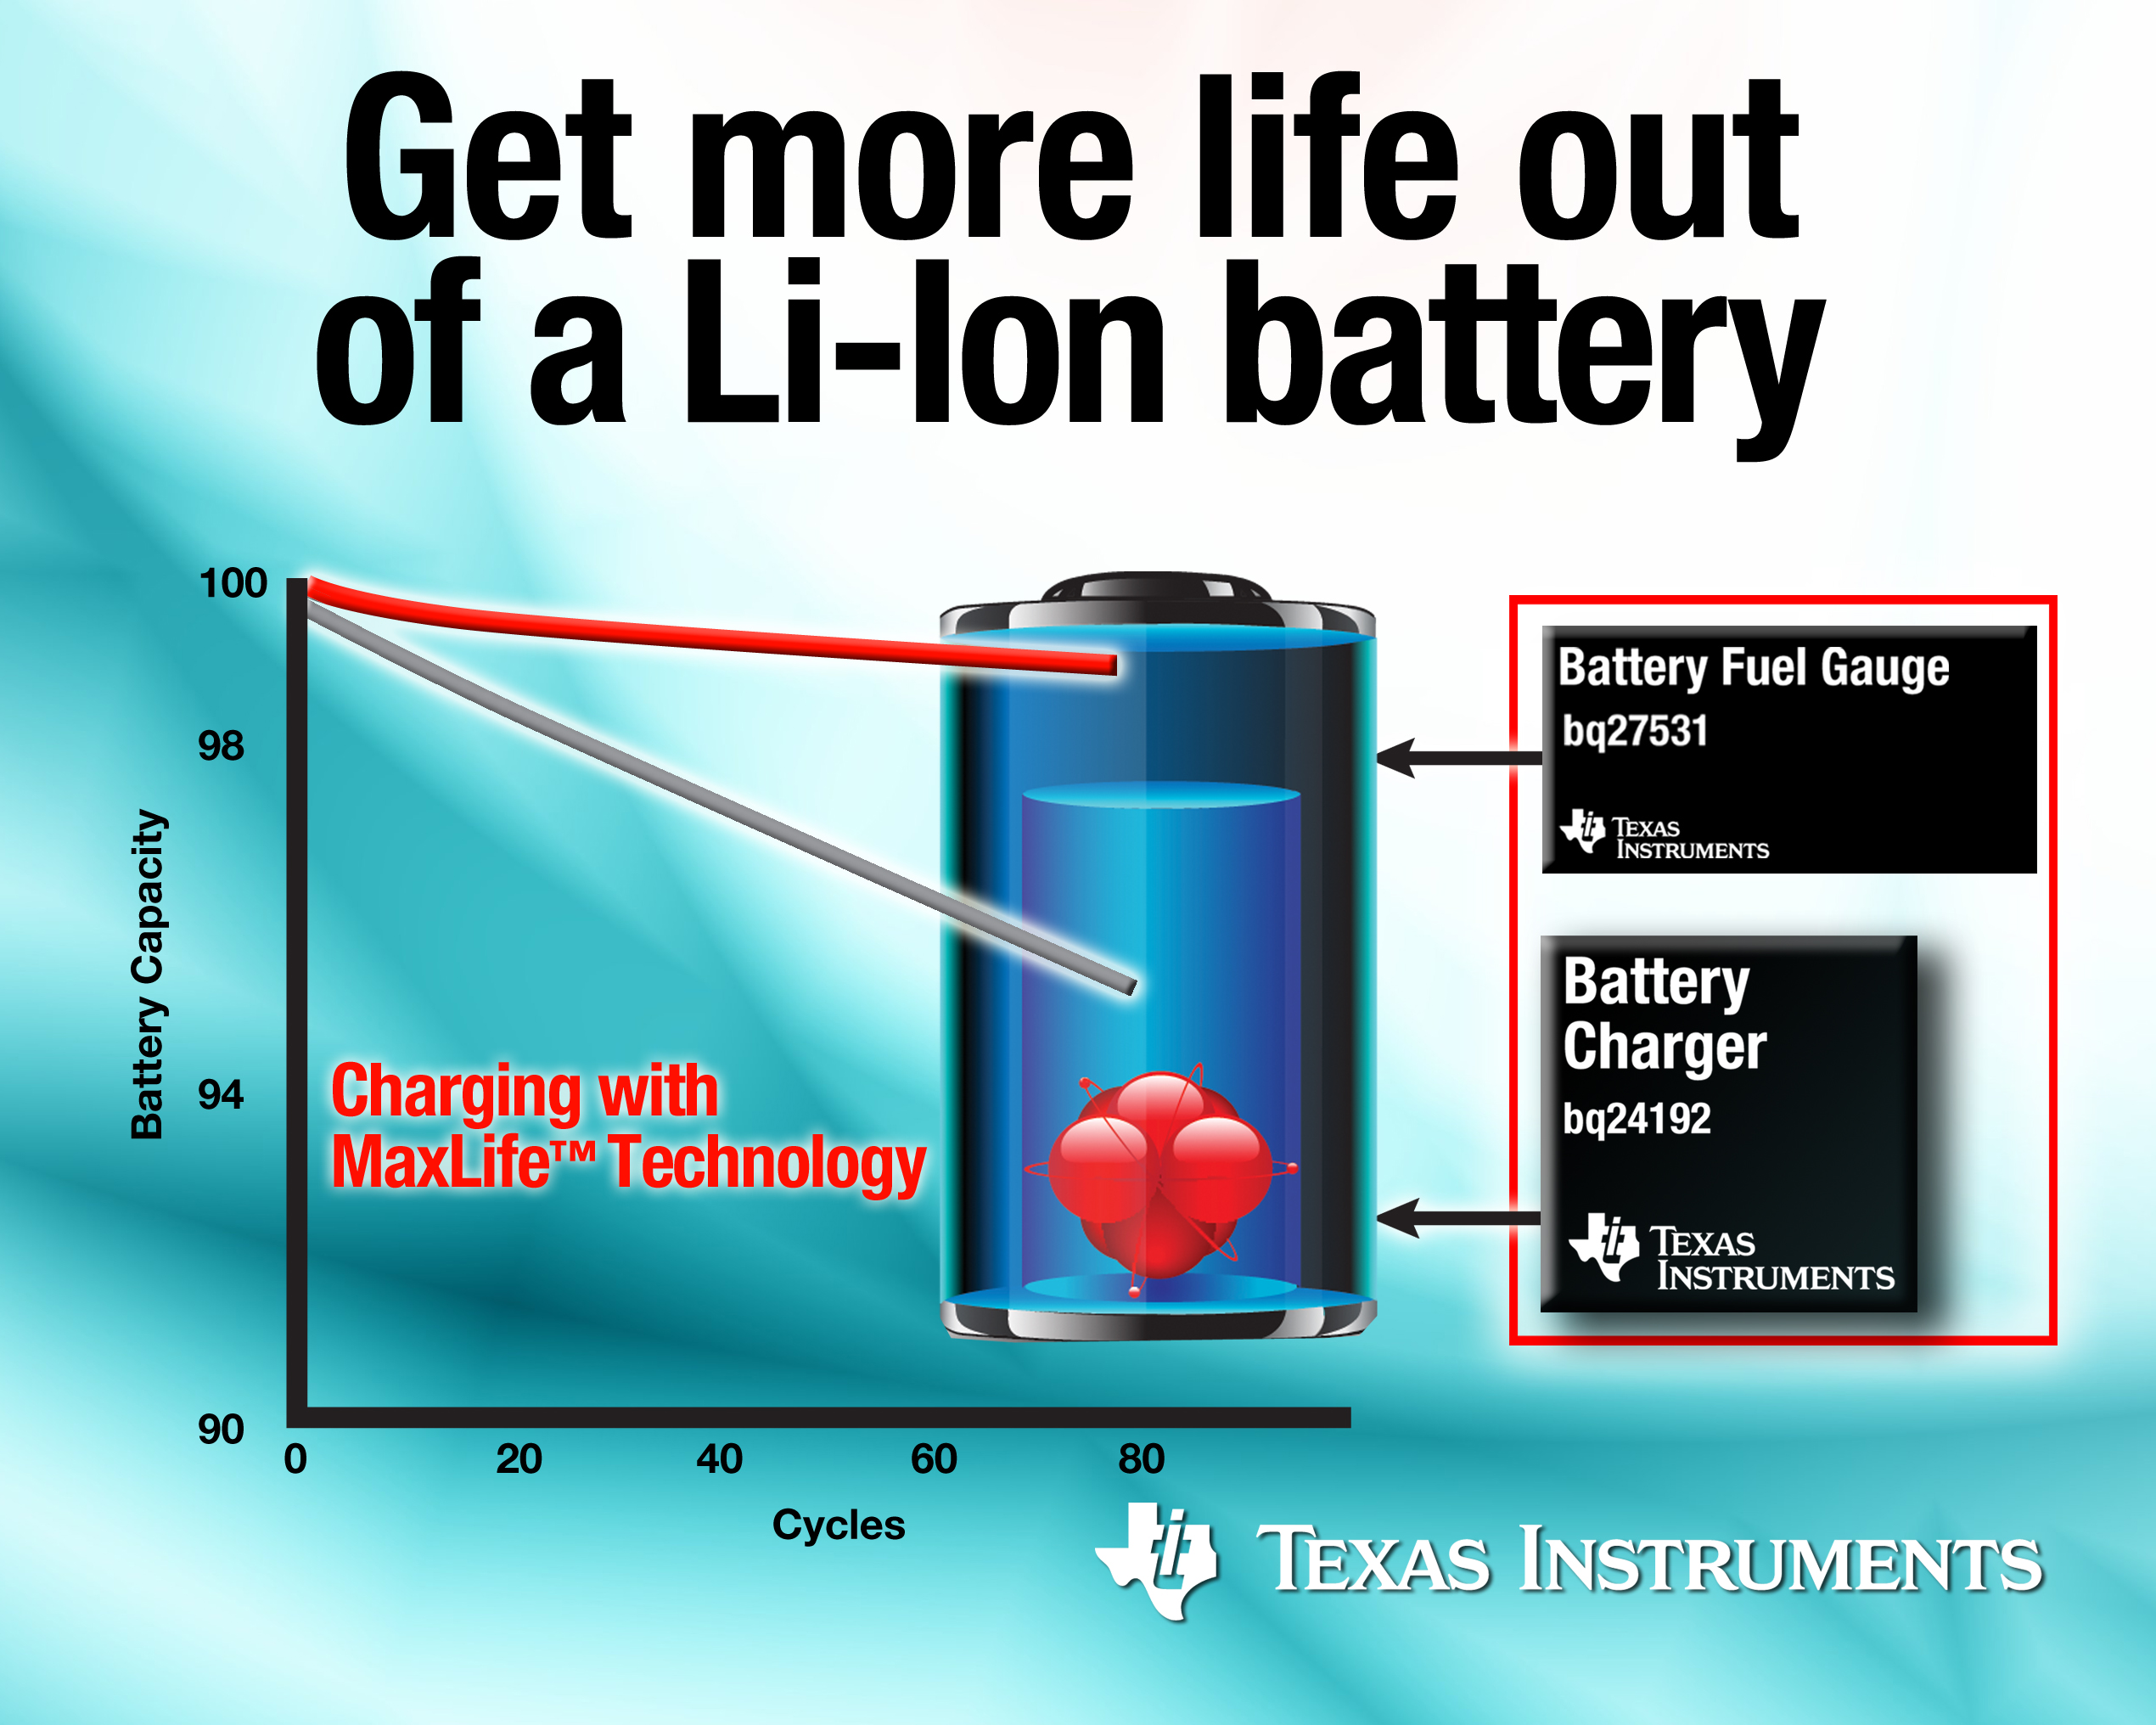 TI fast-charge technology gets more life out of a Li-Ion battery